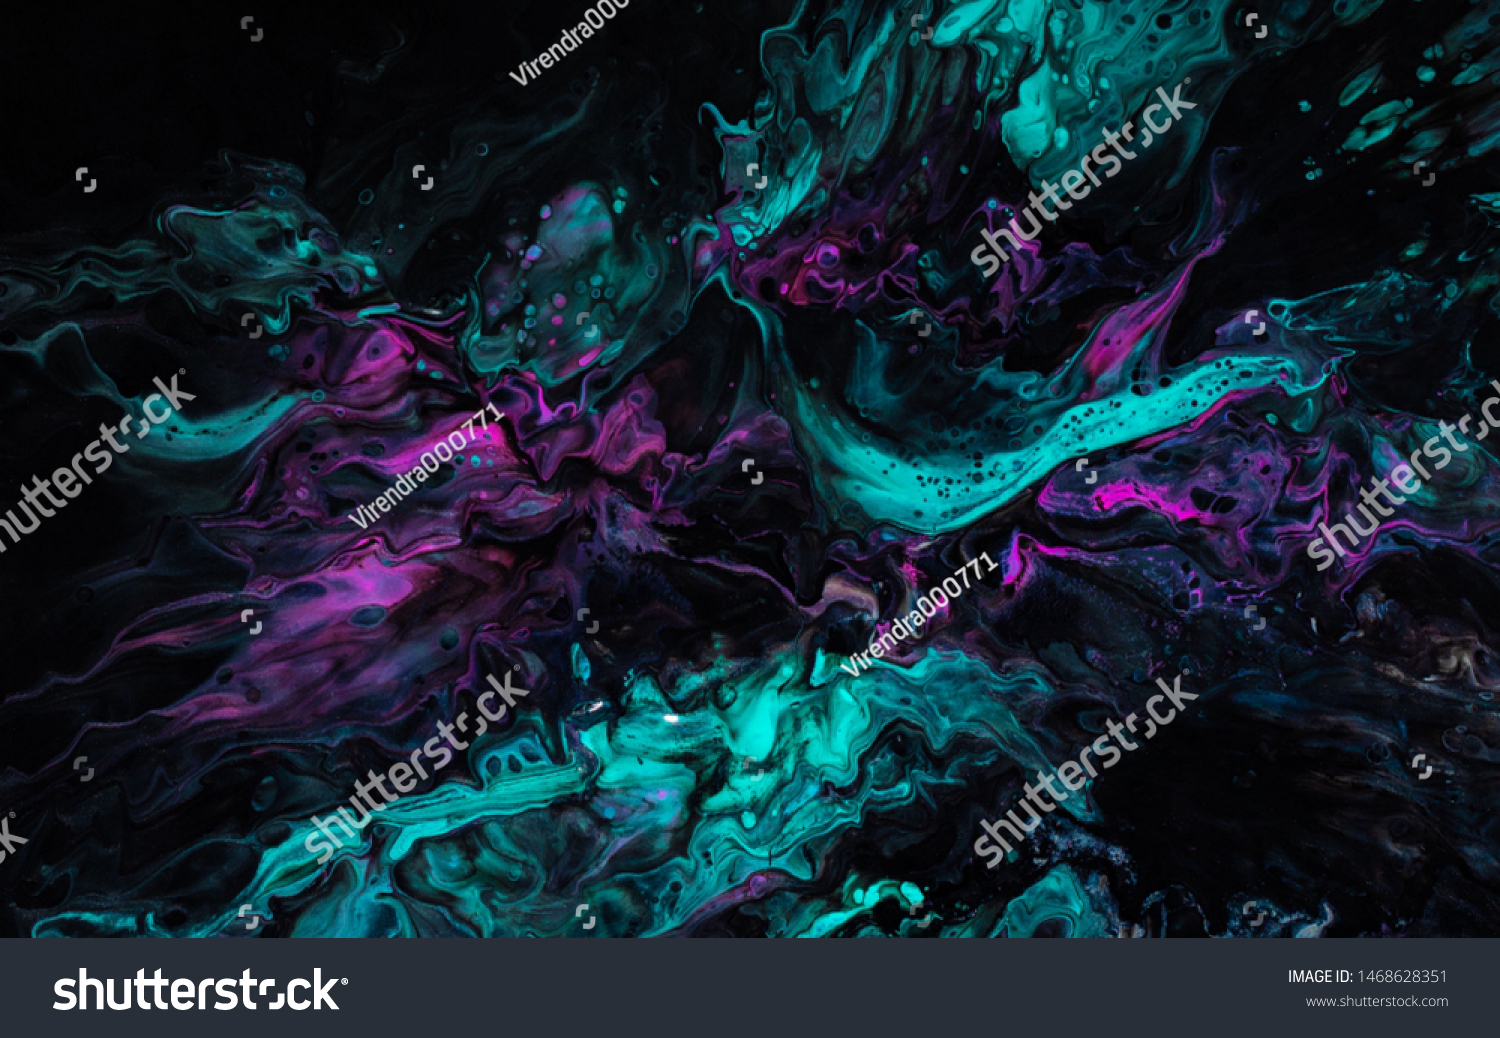 Abstract hd wallpapers images stock photos vectors